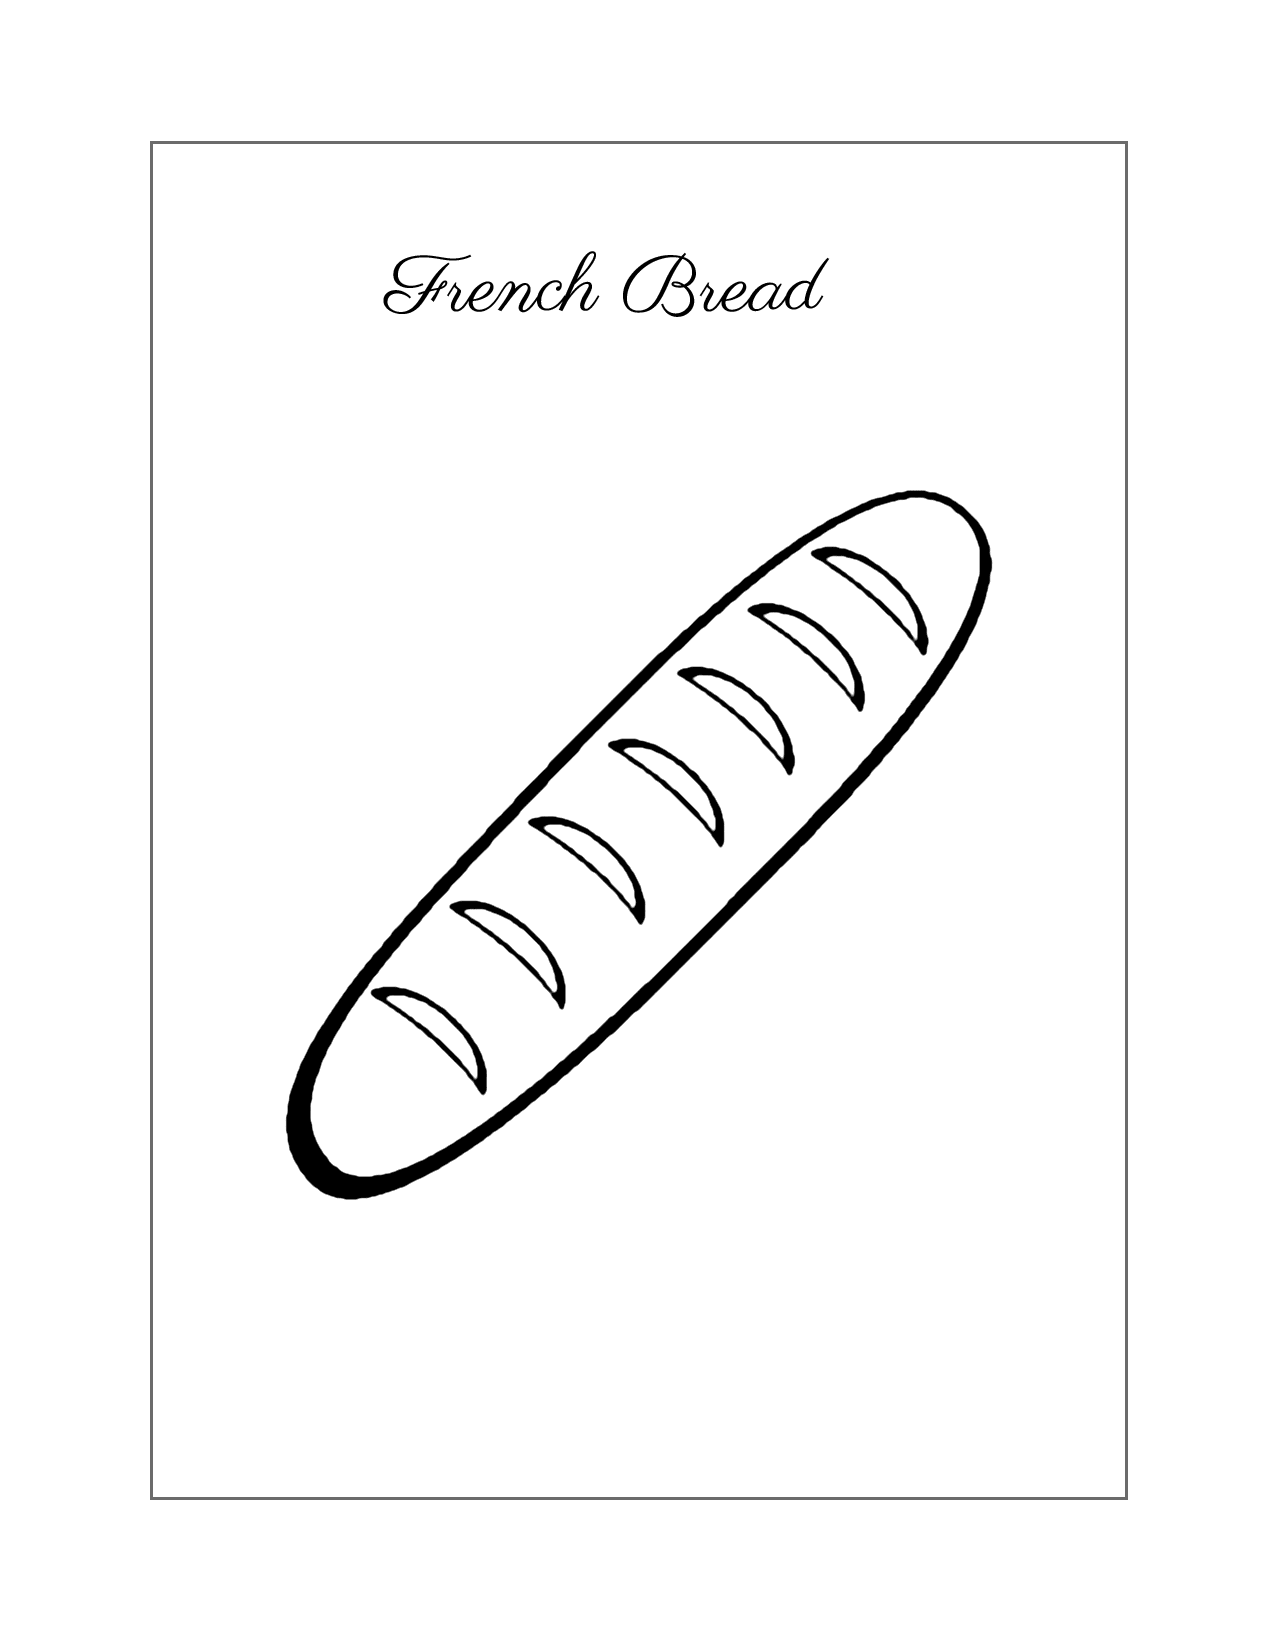 French Bread Coloring Page